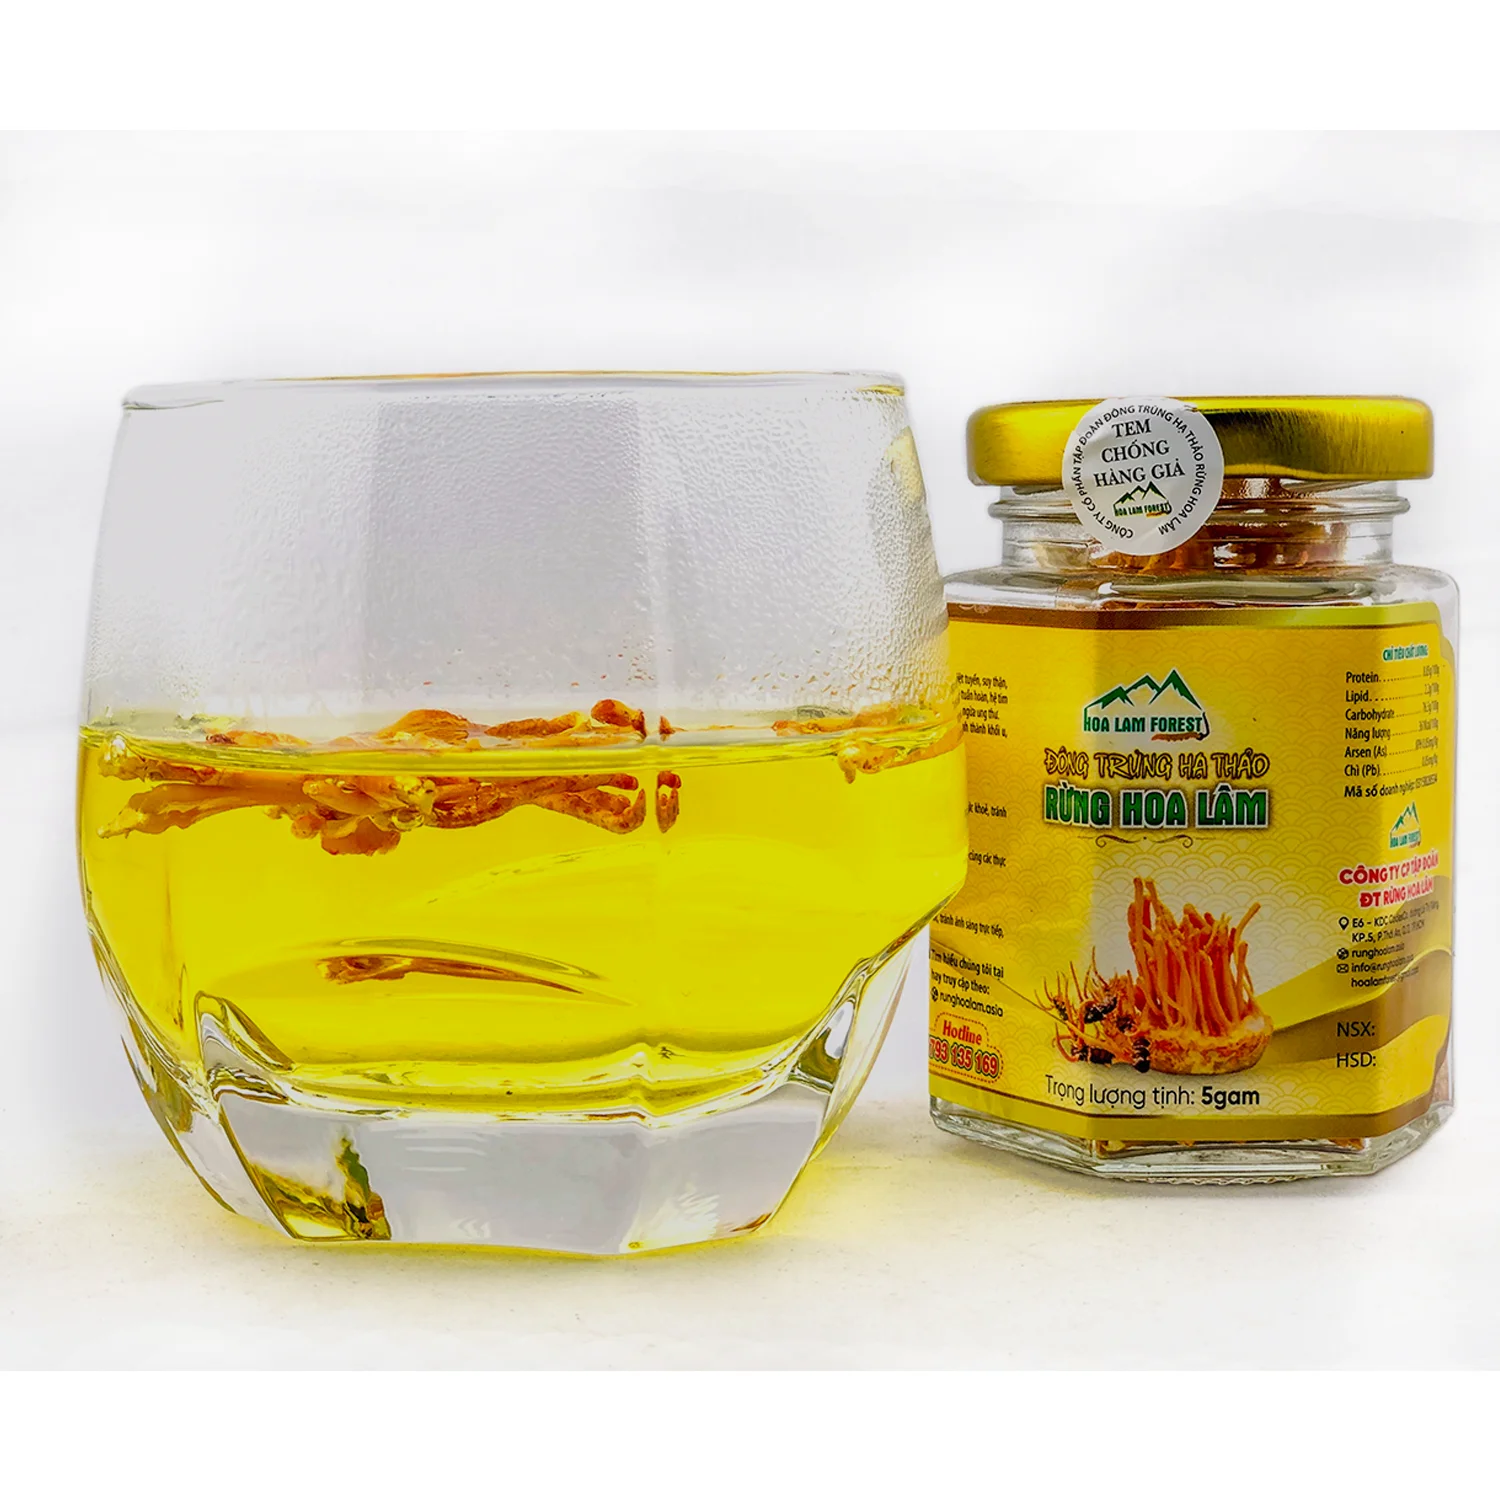 
Cordyceps Healthy Product 100% Natural Herbal High Quality Product Good For Health Providing Energy V Store Private Label  (10000001883534)